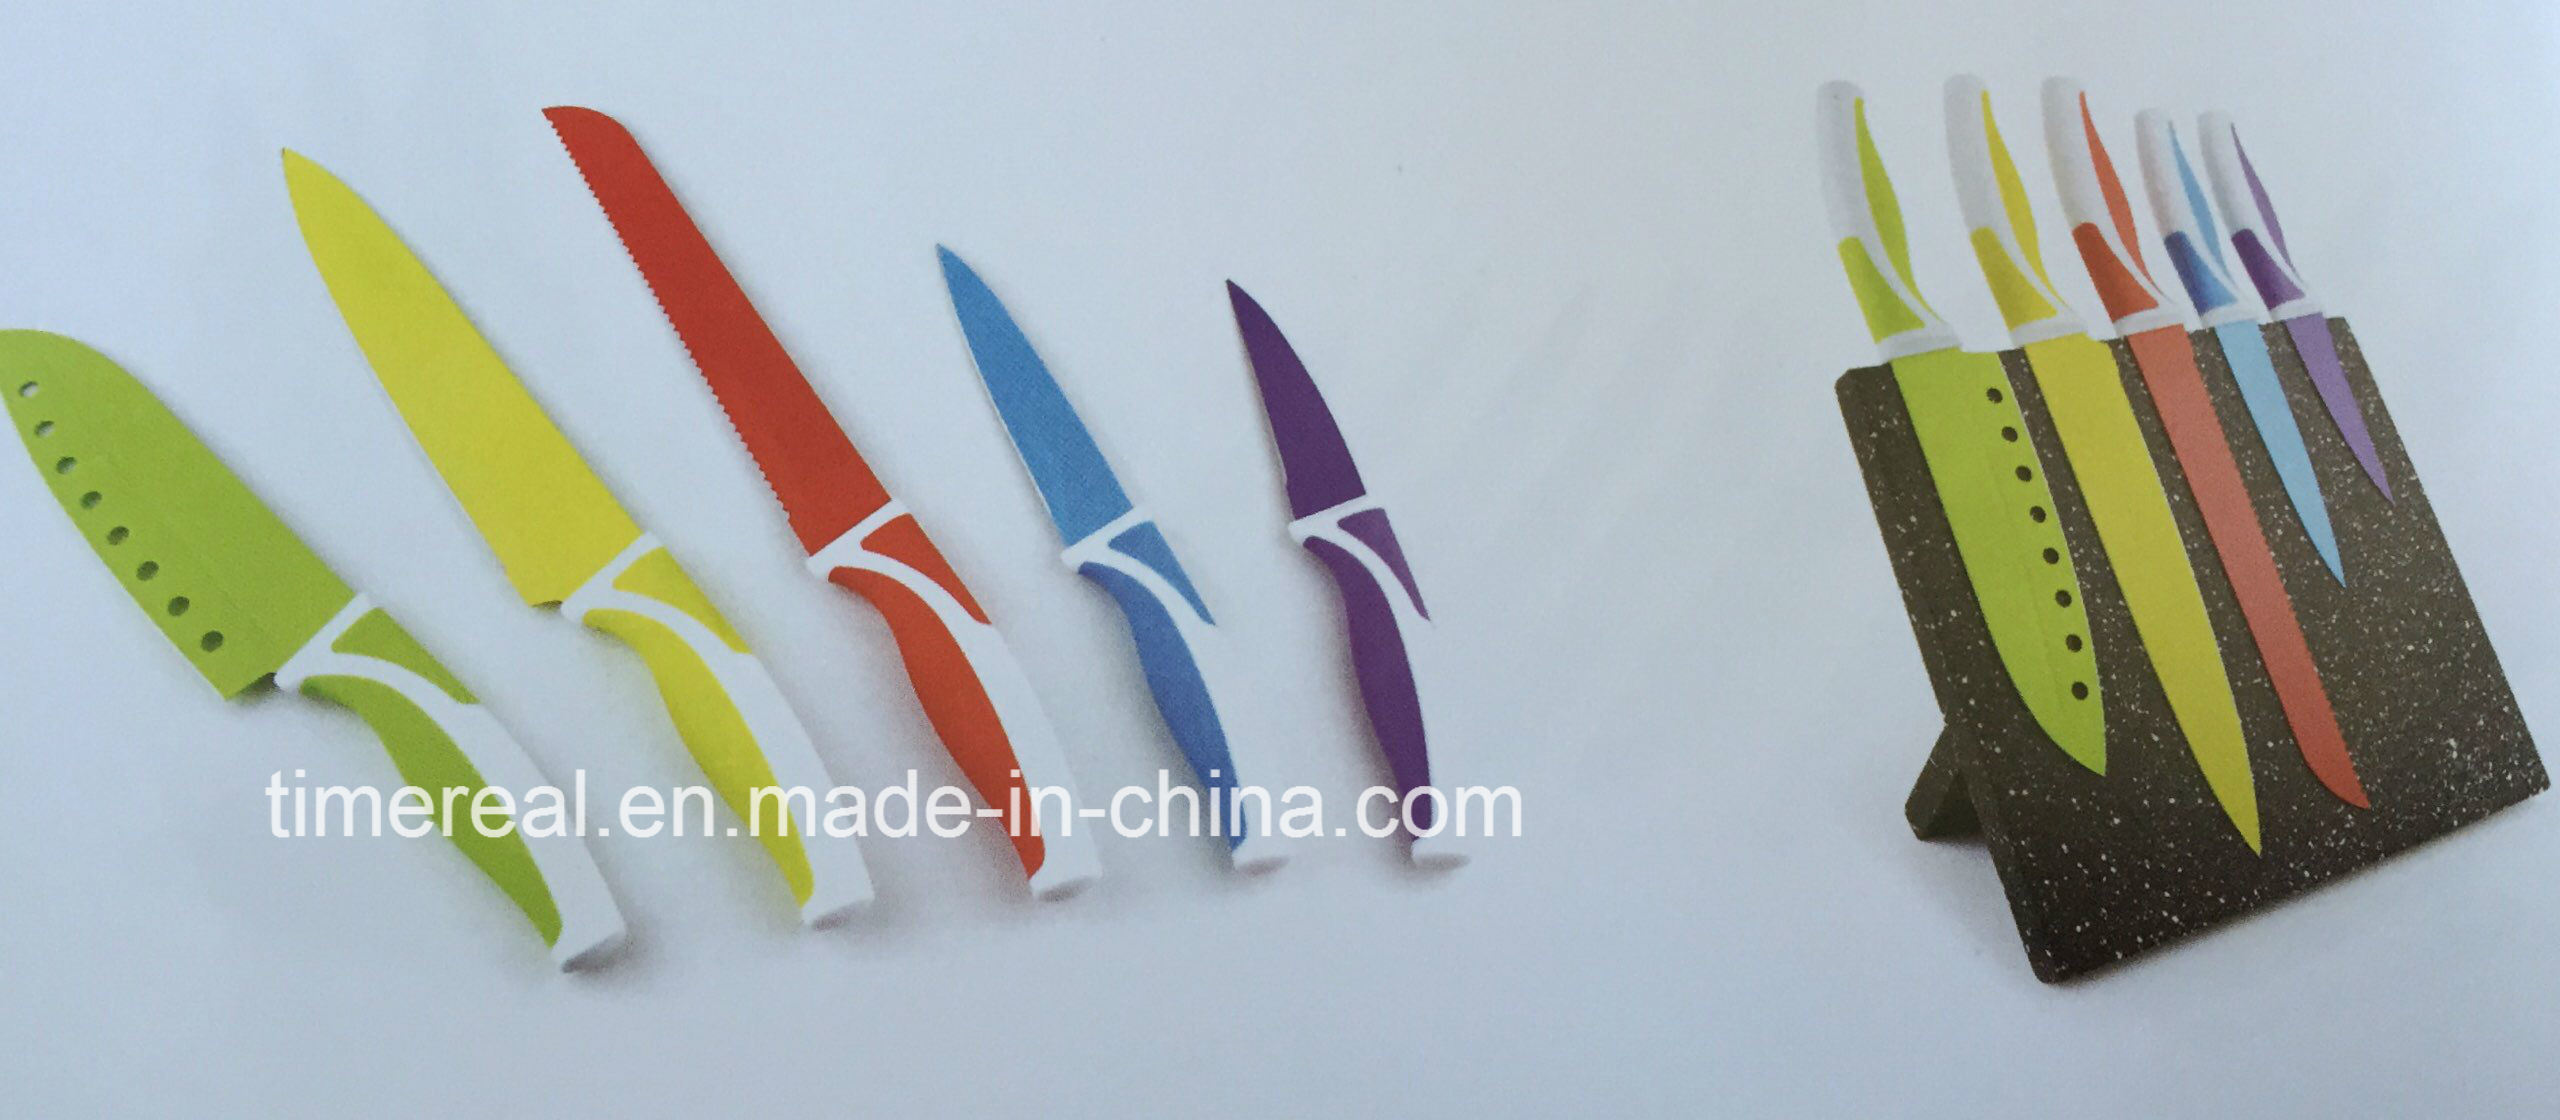 Stainless Steel Kitchen Knives Set with Painting No. Fj-0038